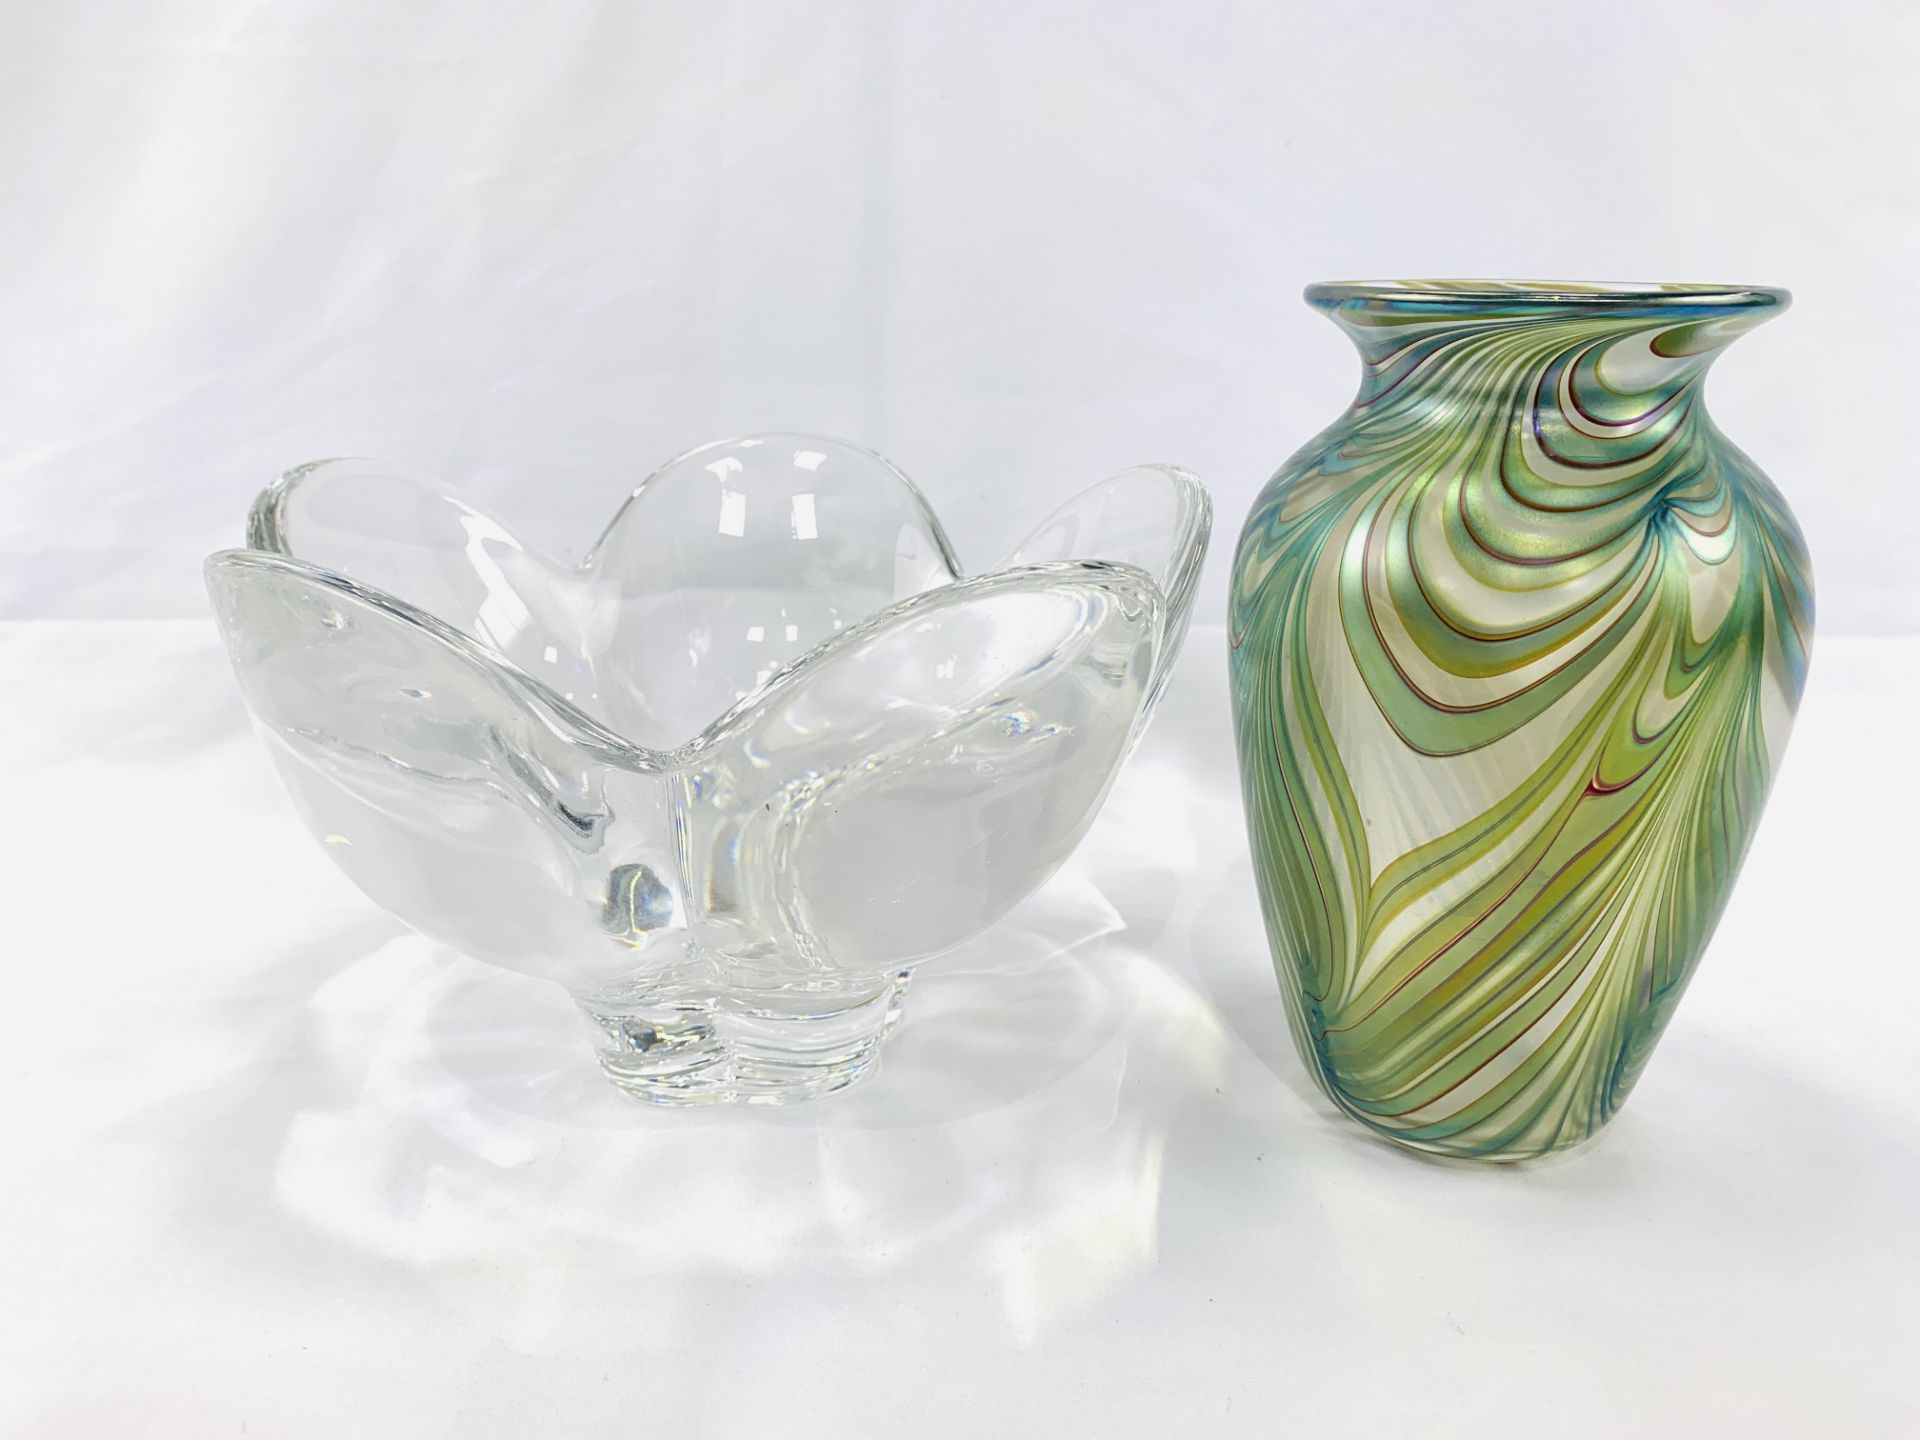 Lead glass petal shaped bowl by Orrefors and an iridescent vase by Okra